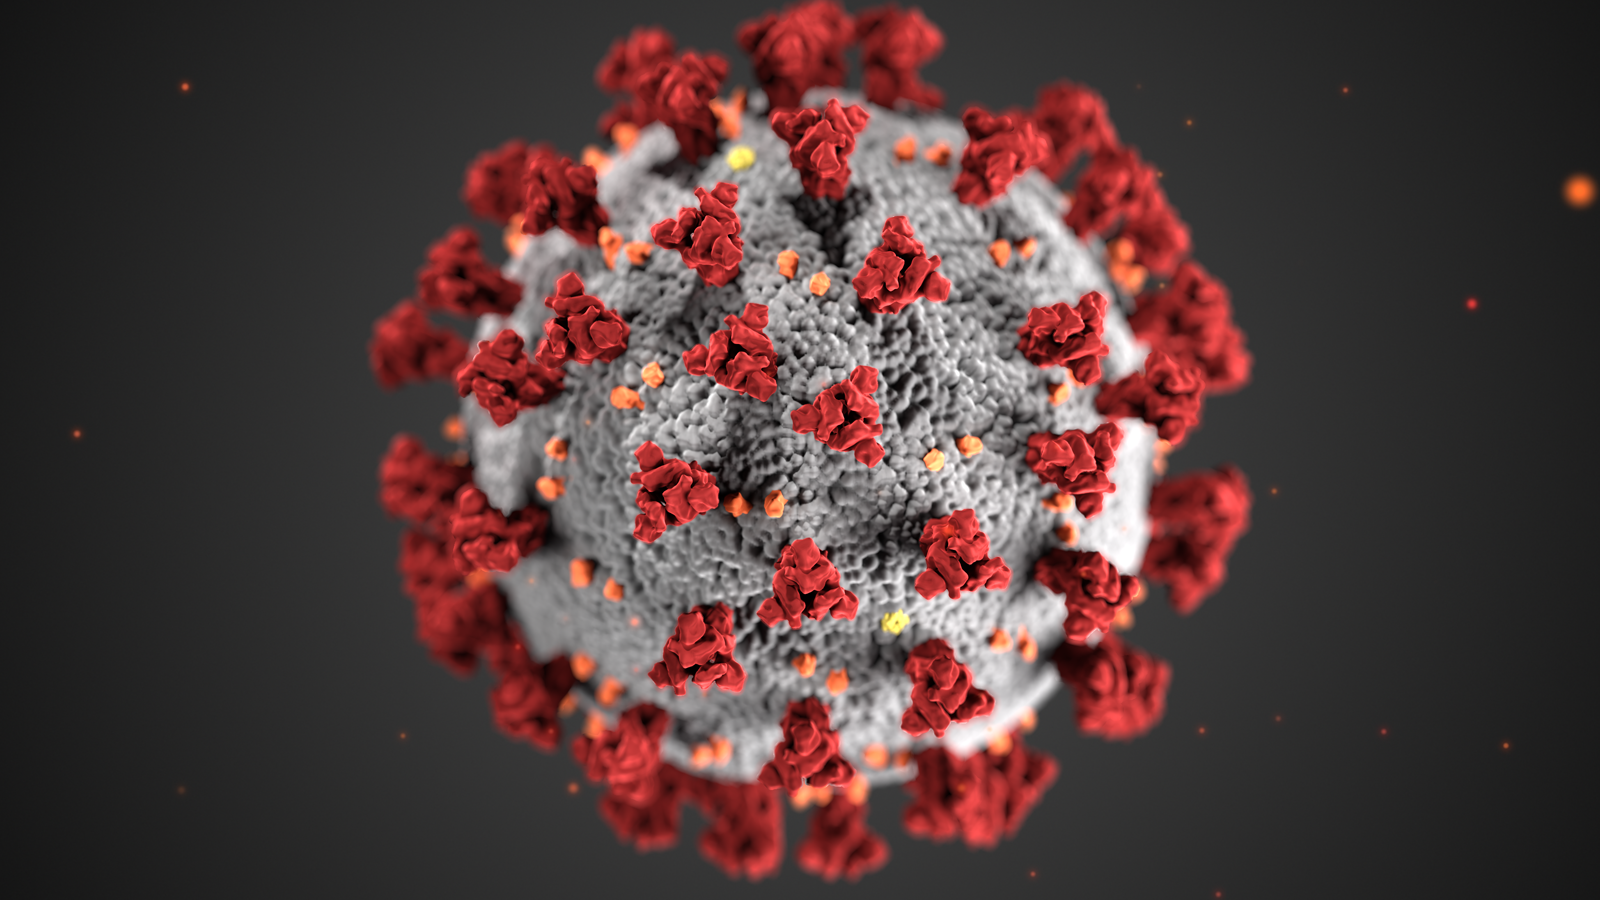 3D image of the COVID-19 virus